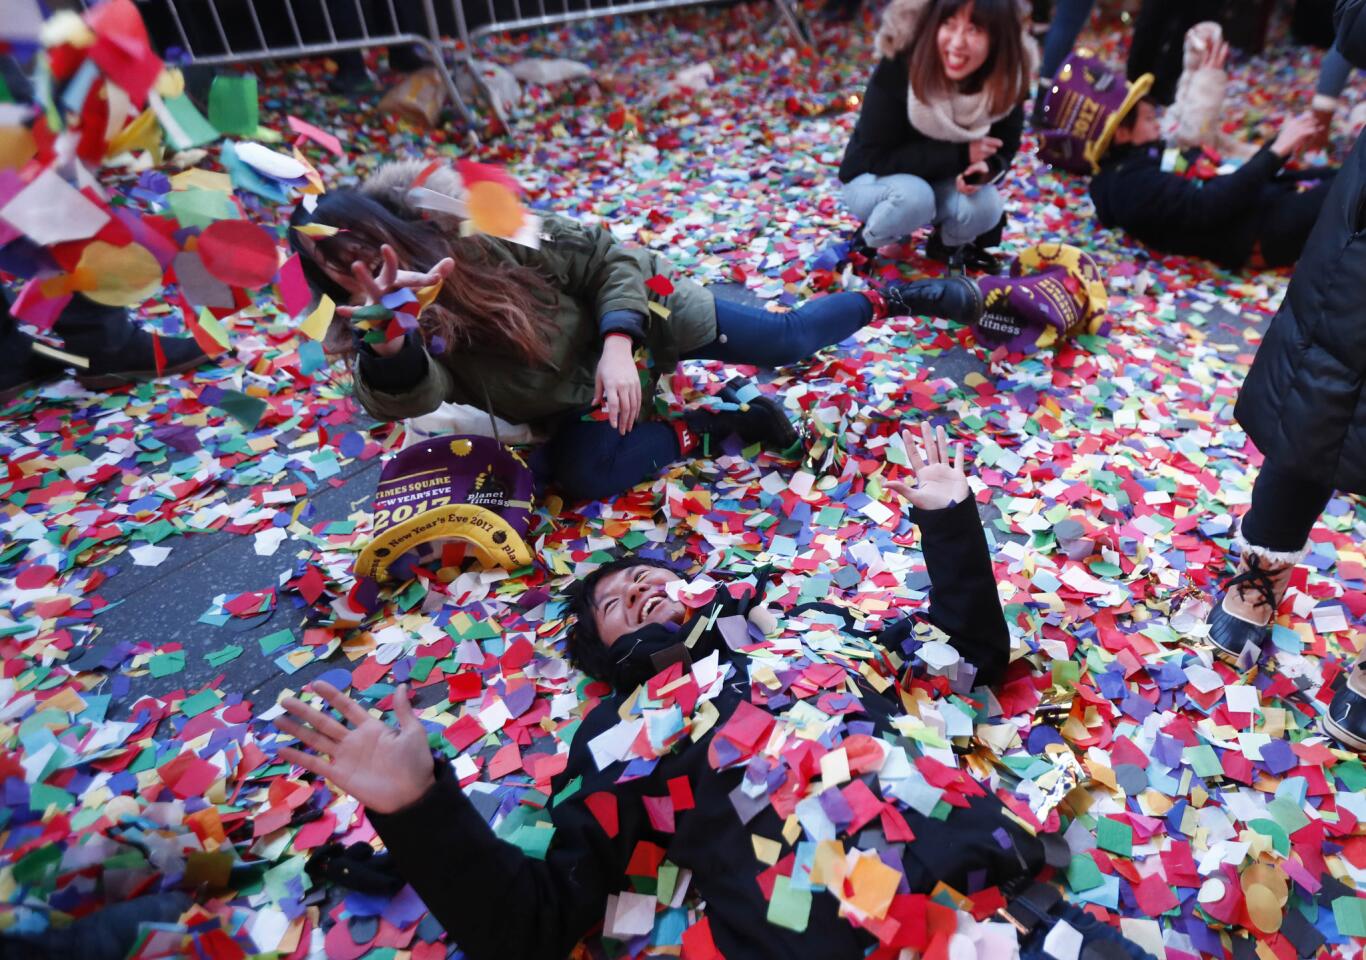 Revelers enjoy the confetti in Times Square.